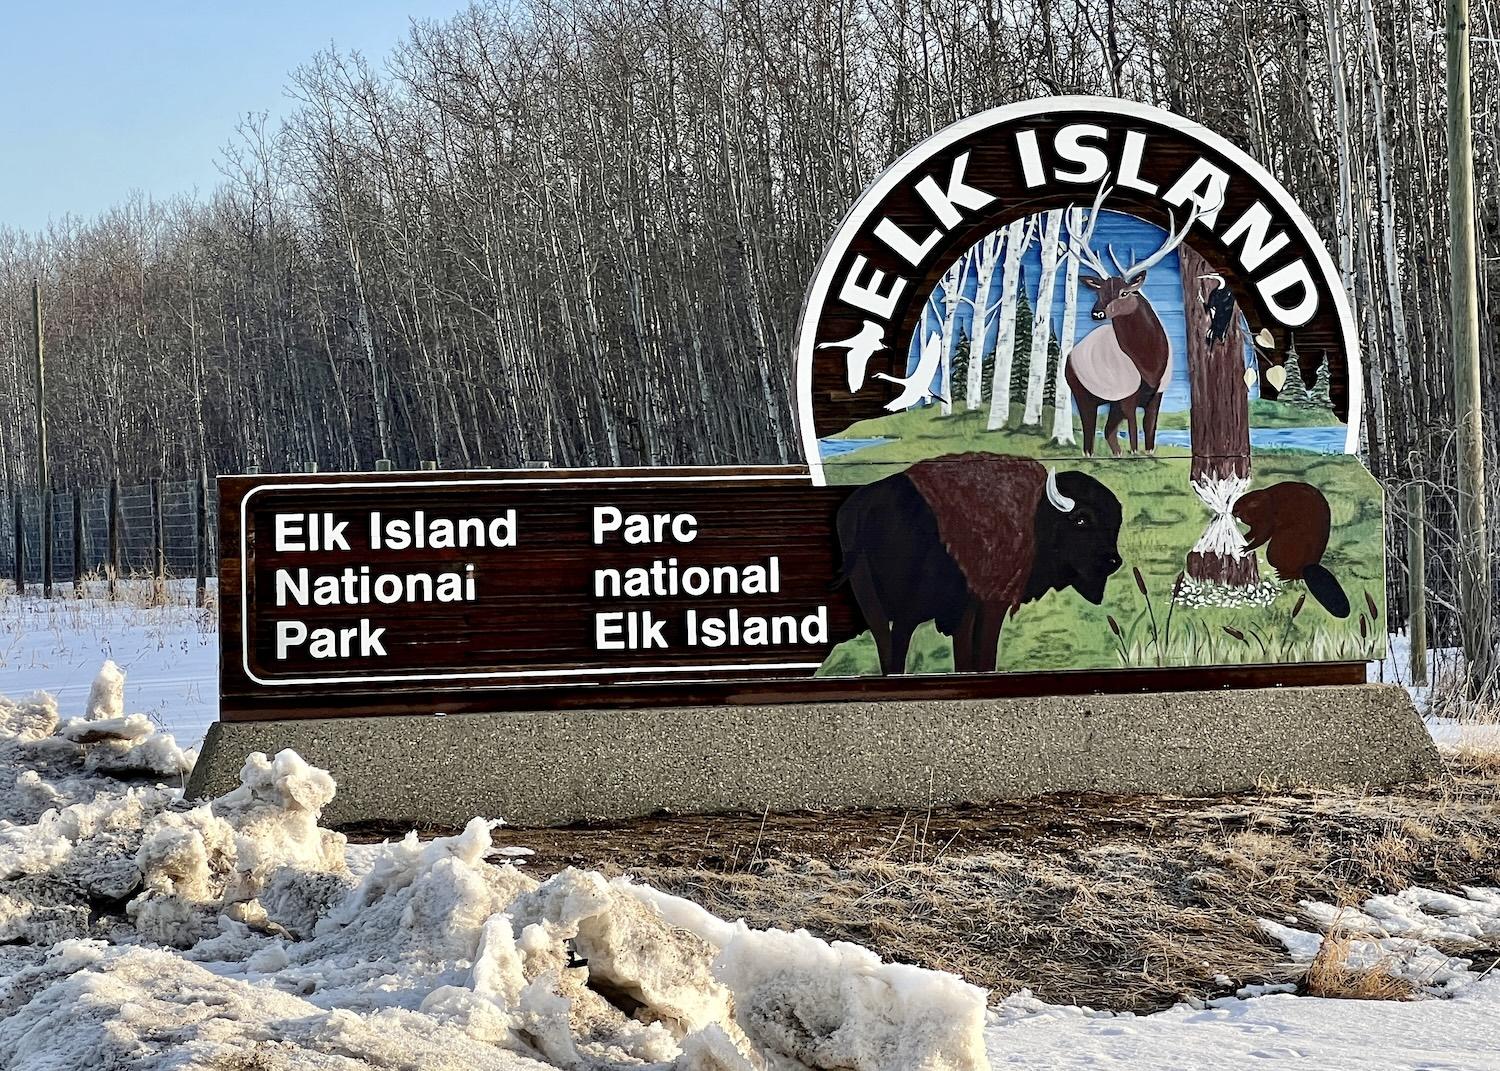 Despite what the name suggests, Elk Island National Park near Edmonton, Alberta is known for its bison.